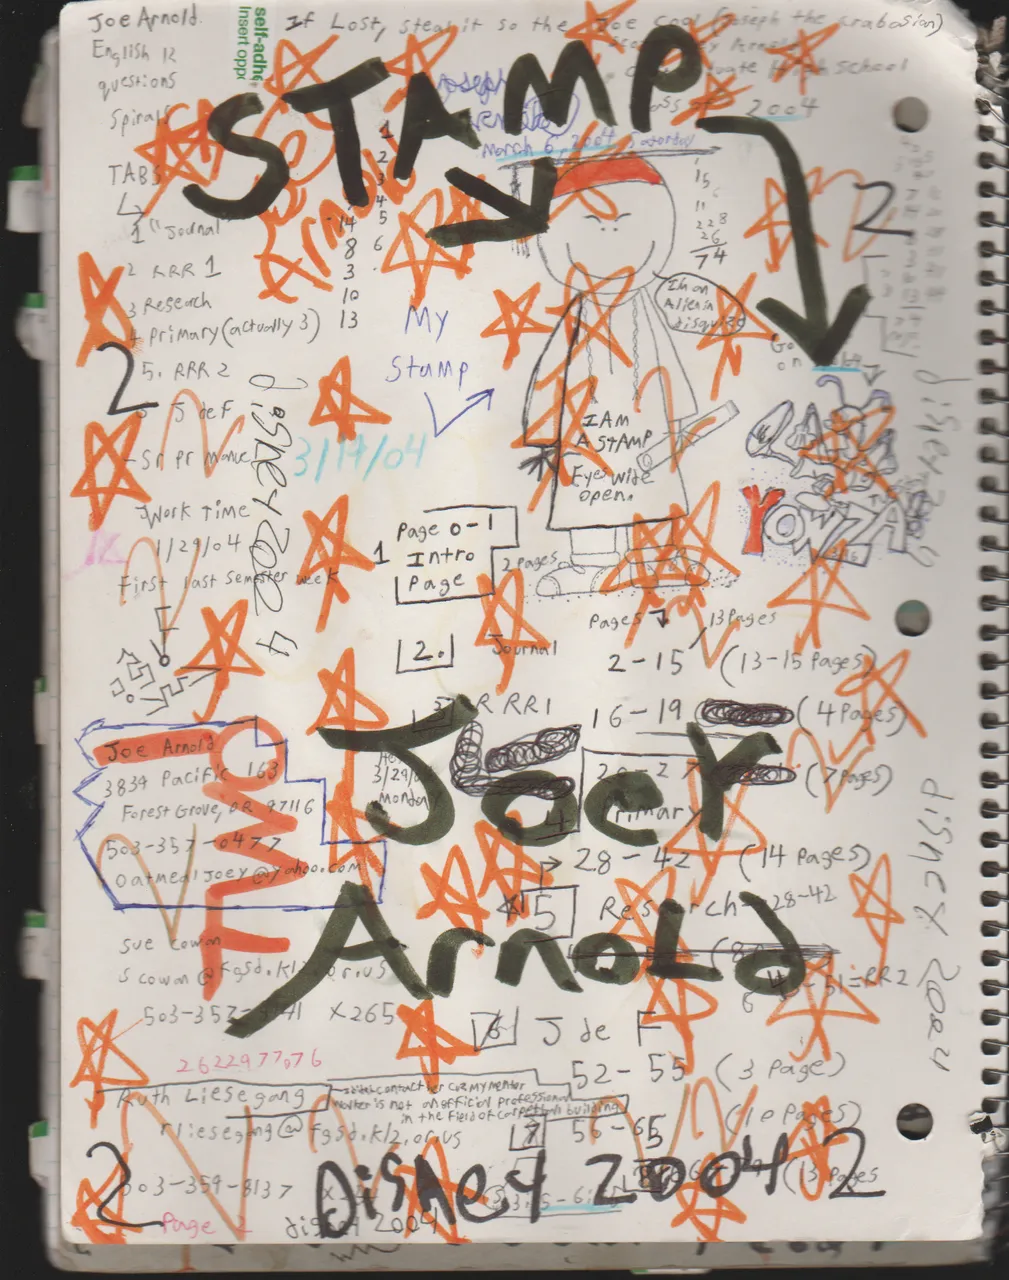 2004-01-29 - Thursday - Carpetball FGHS Senior Project Journal, Joey Arnold, Part 01, Notebook-4.png